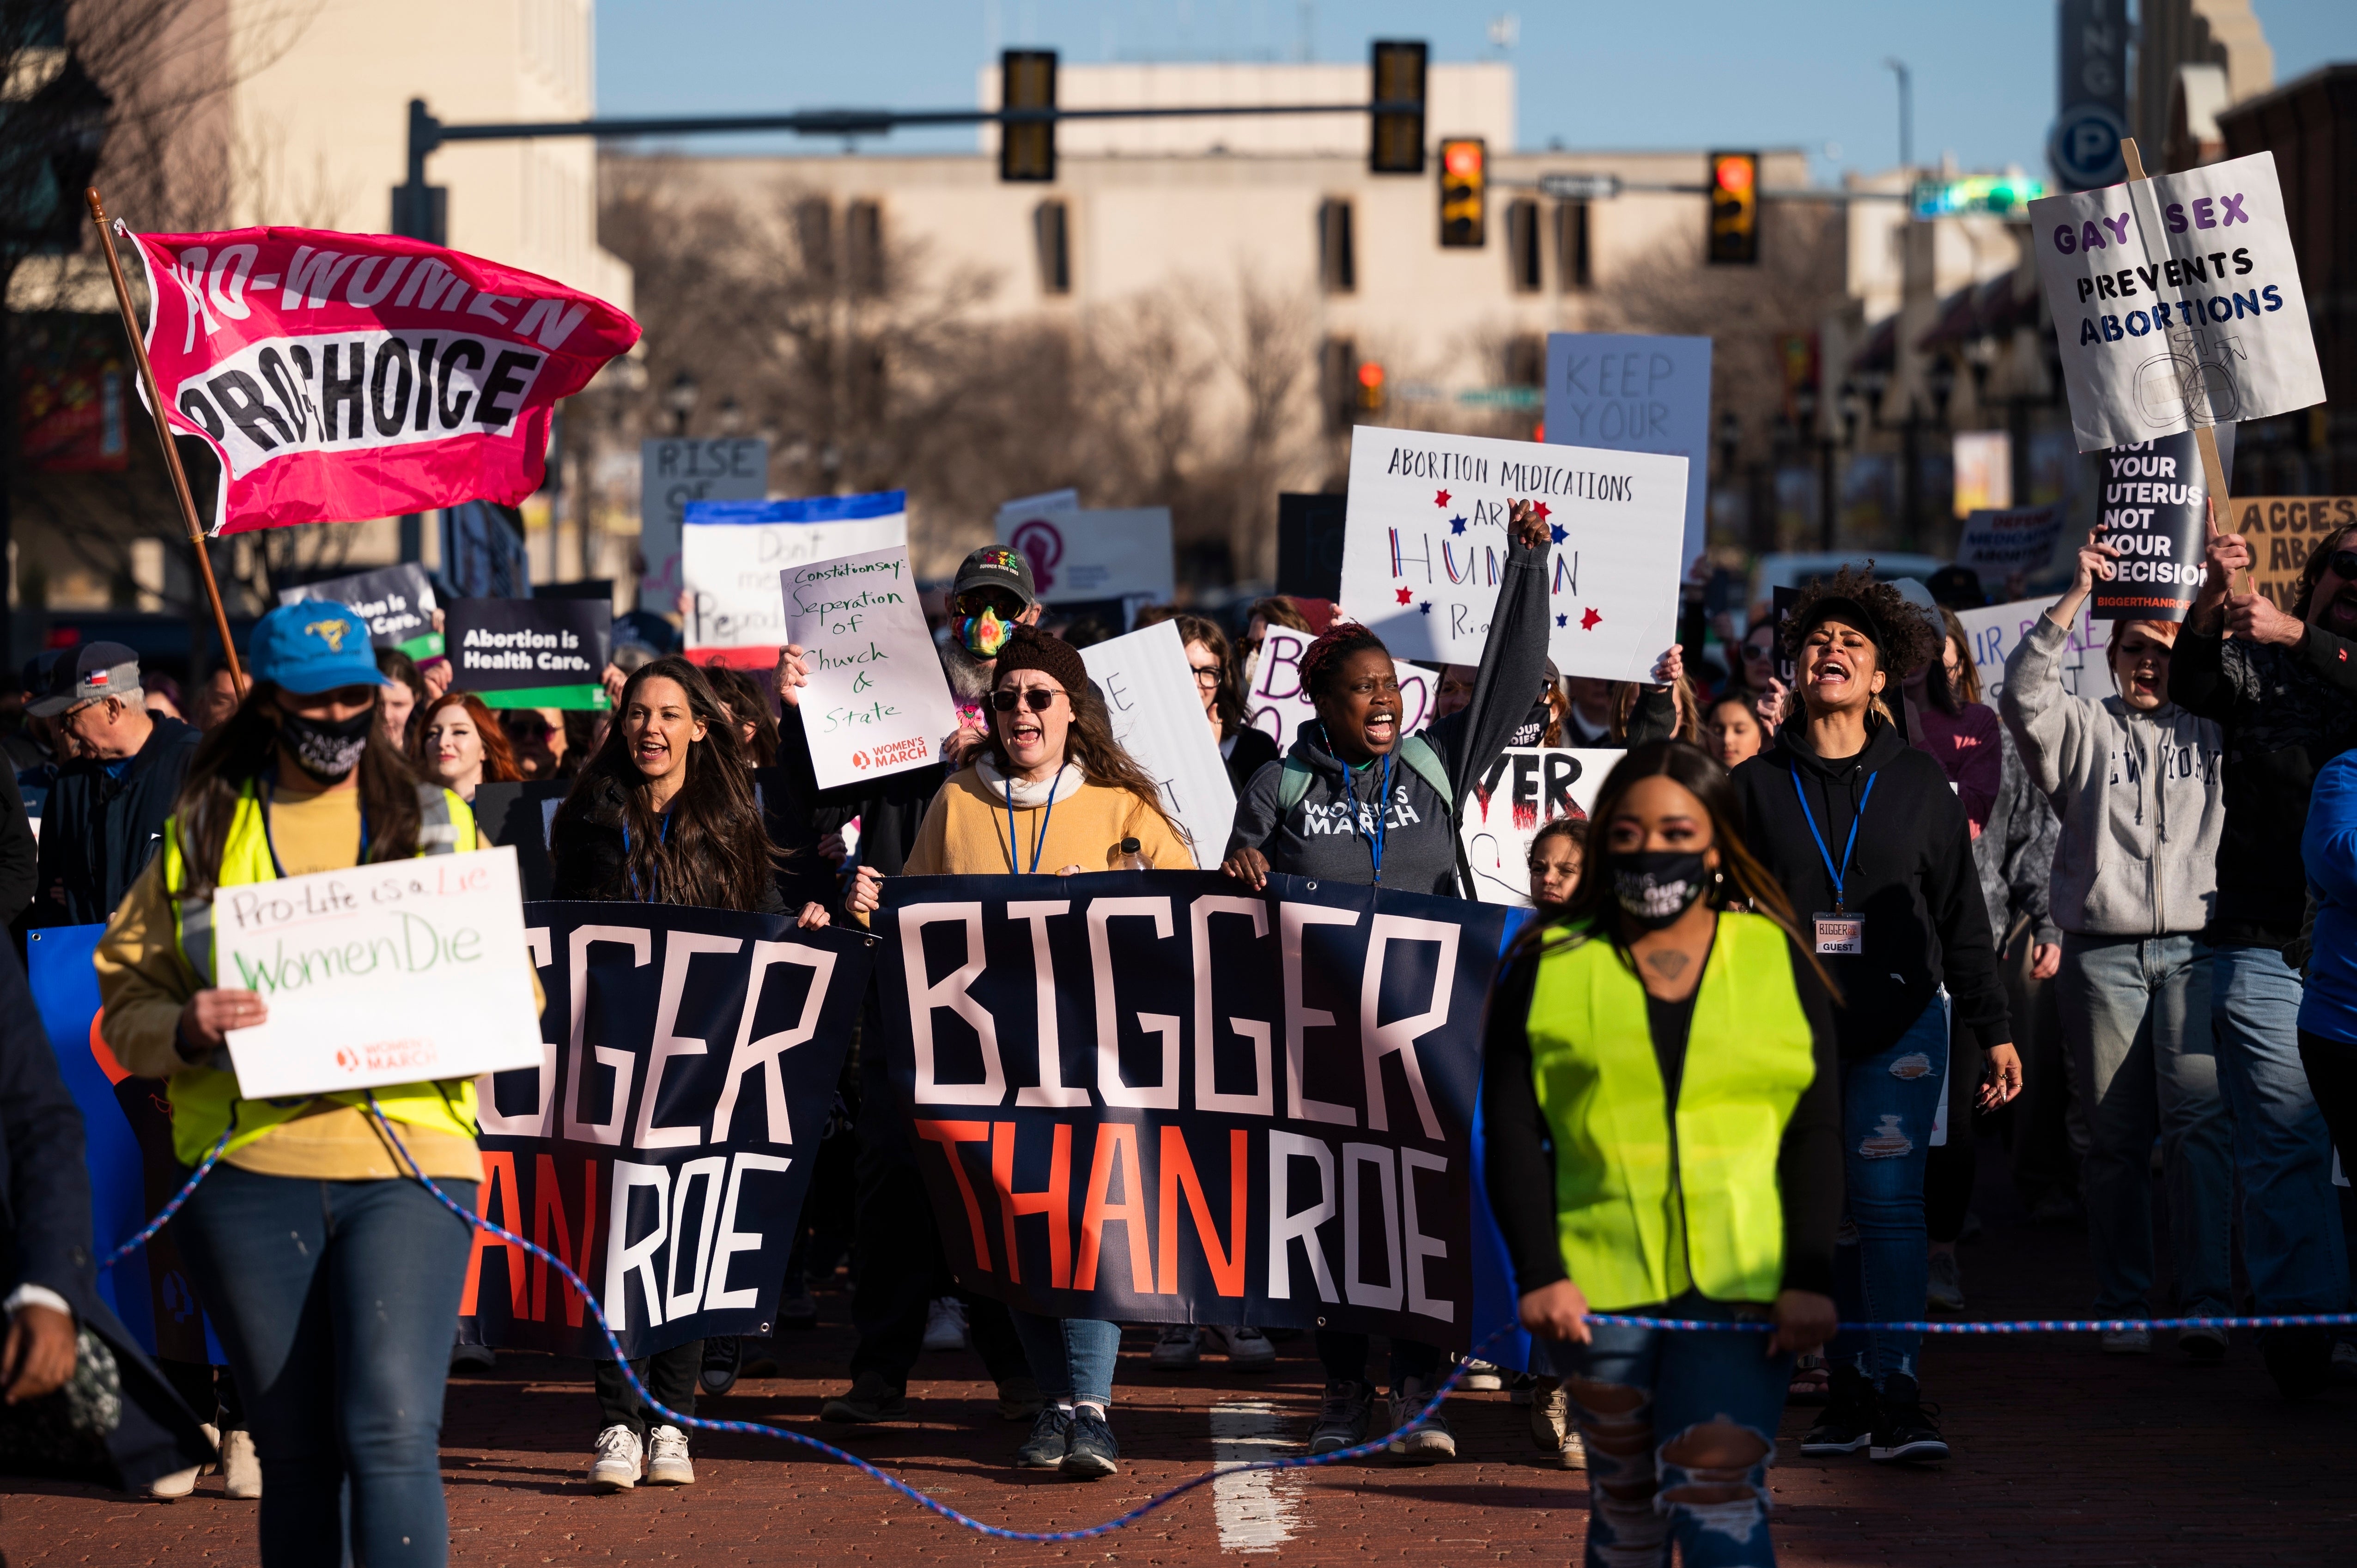 Abortion rights protesters march in Amarillo, Texas to demonstrate against a lawsuit seeking to revoke access to a critical medication abortion drug.